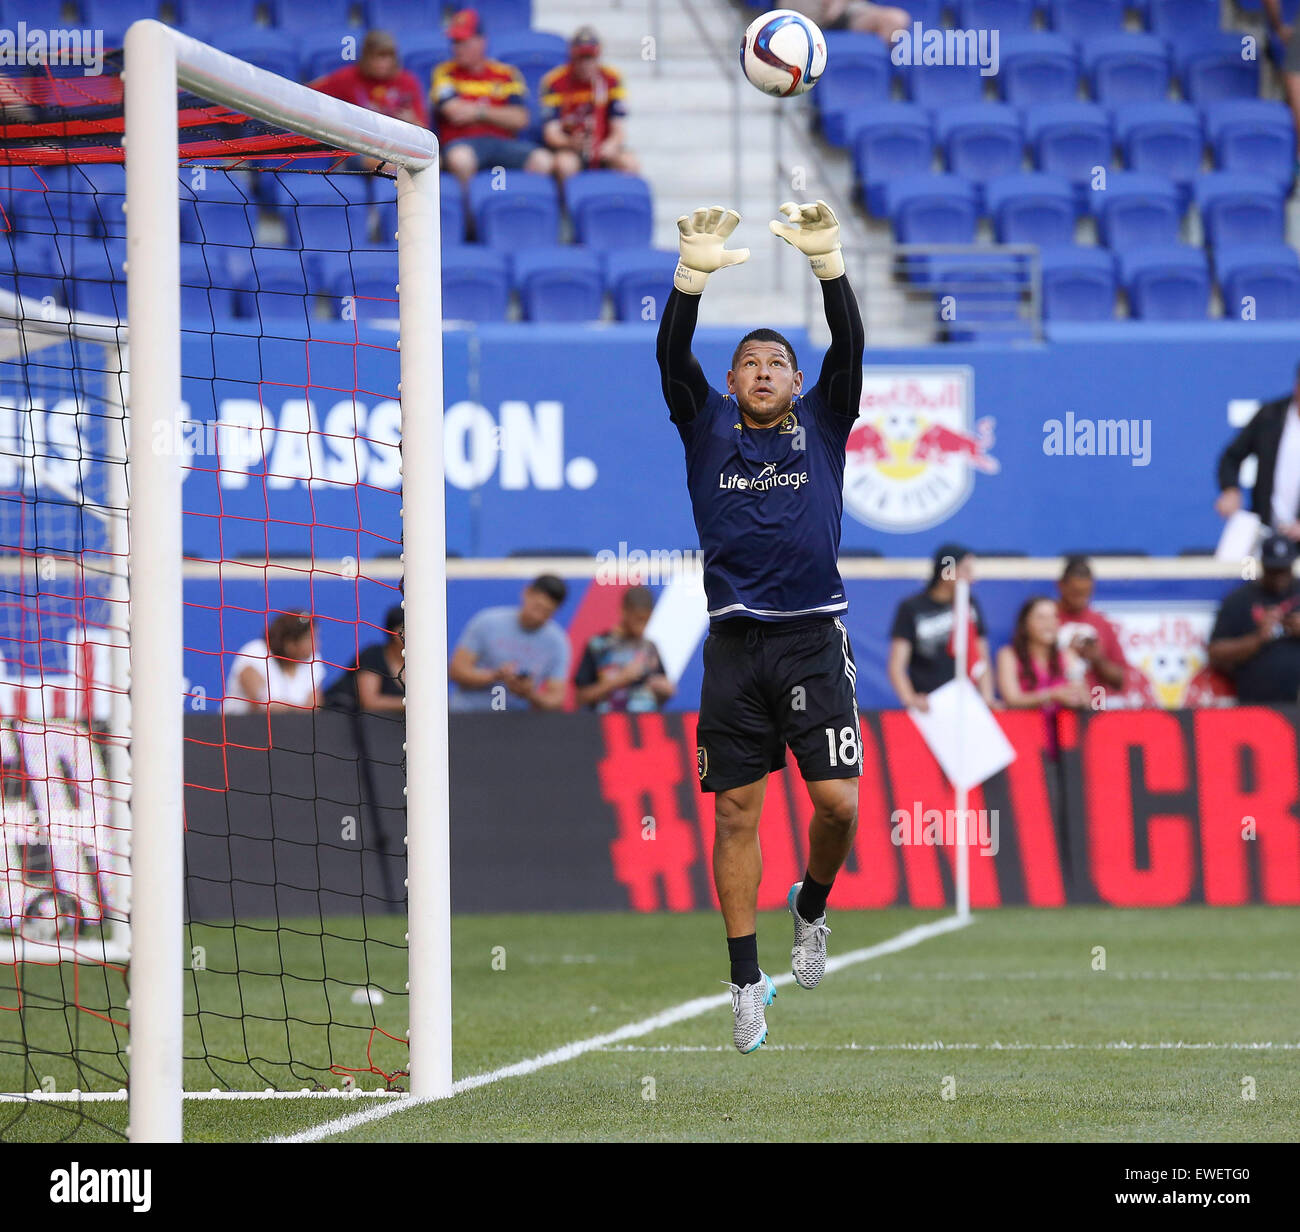 Harrison, New Jersey, USA. 24th June, 2015. Real Salt Lake goalkeeper Nick Rimando (18) warms up before the MLS game between the New York Red Bulls and Real Salt Lake at Red Bull Arena in Harrison, NJ. Credit:  csm/Alamy Live News Stock Photo